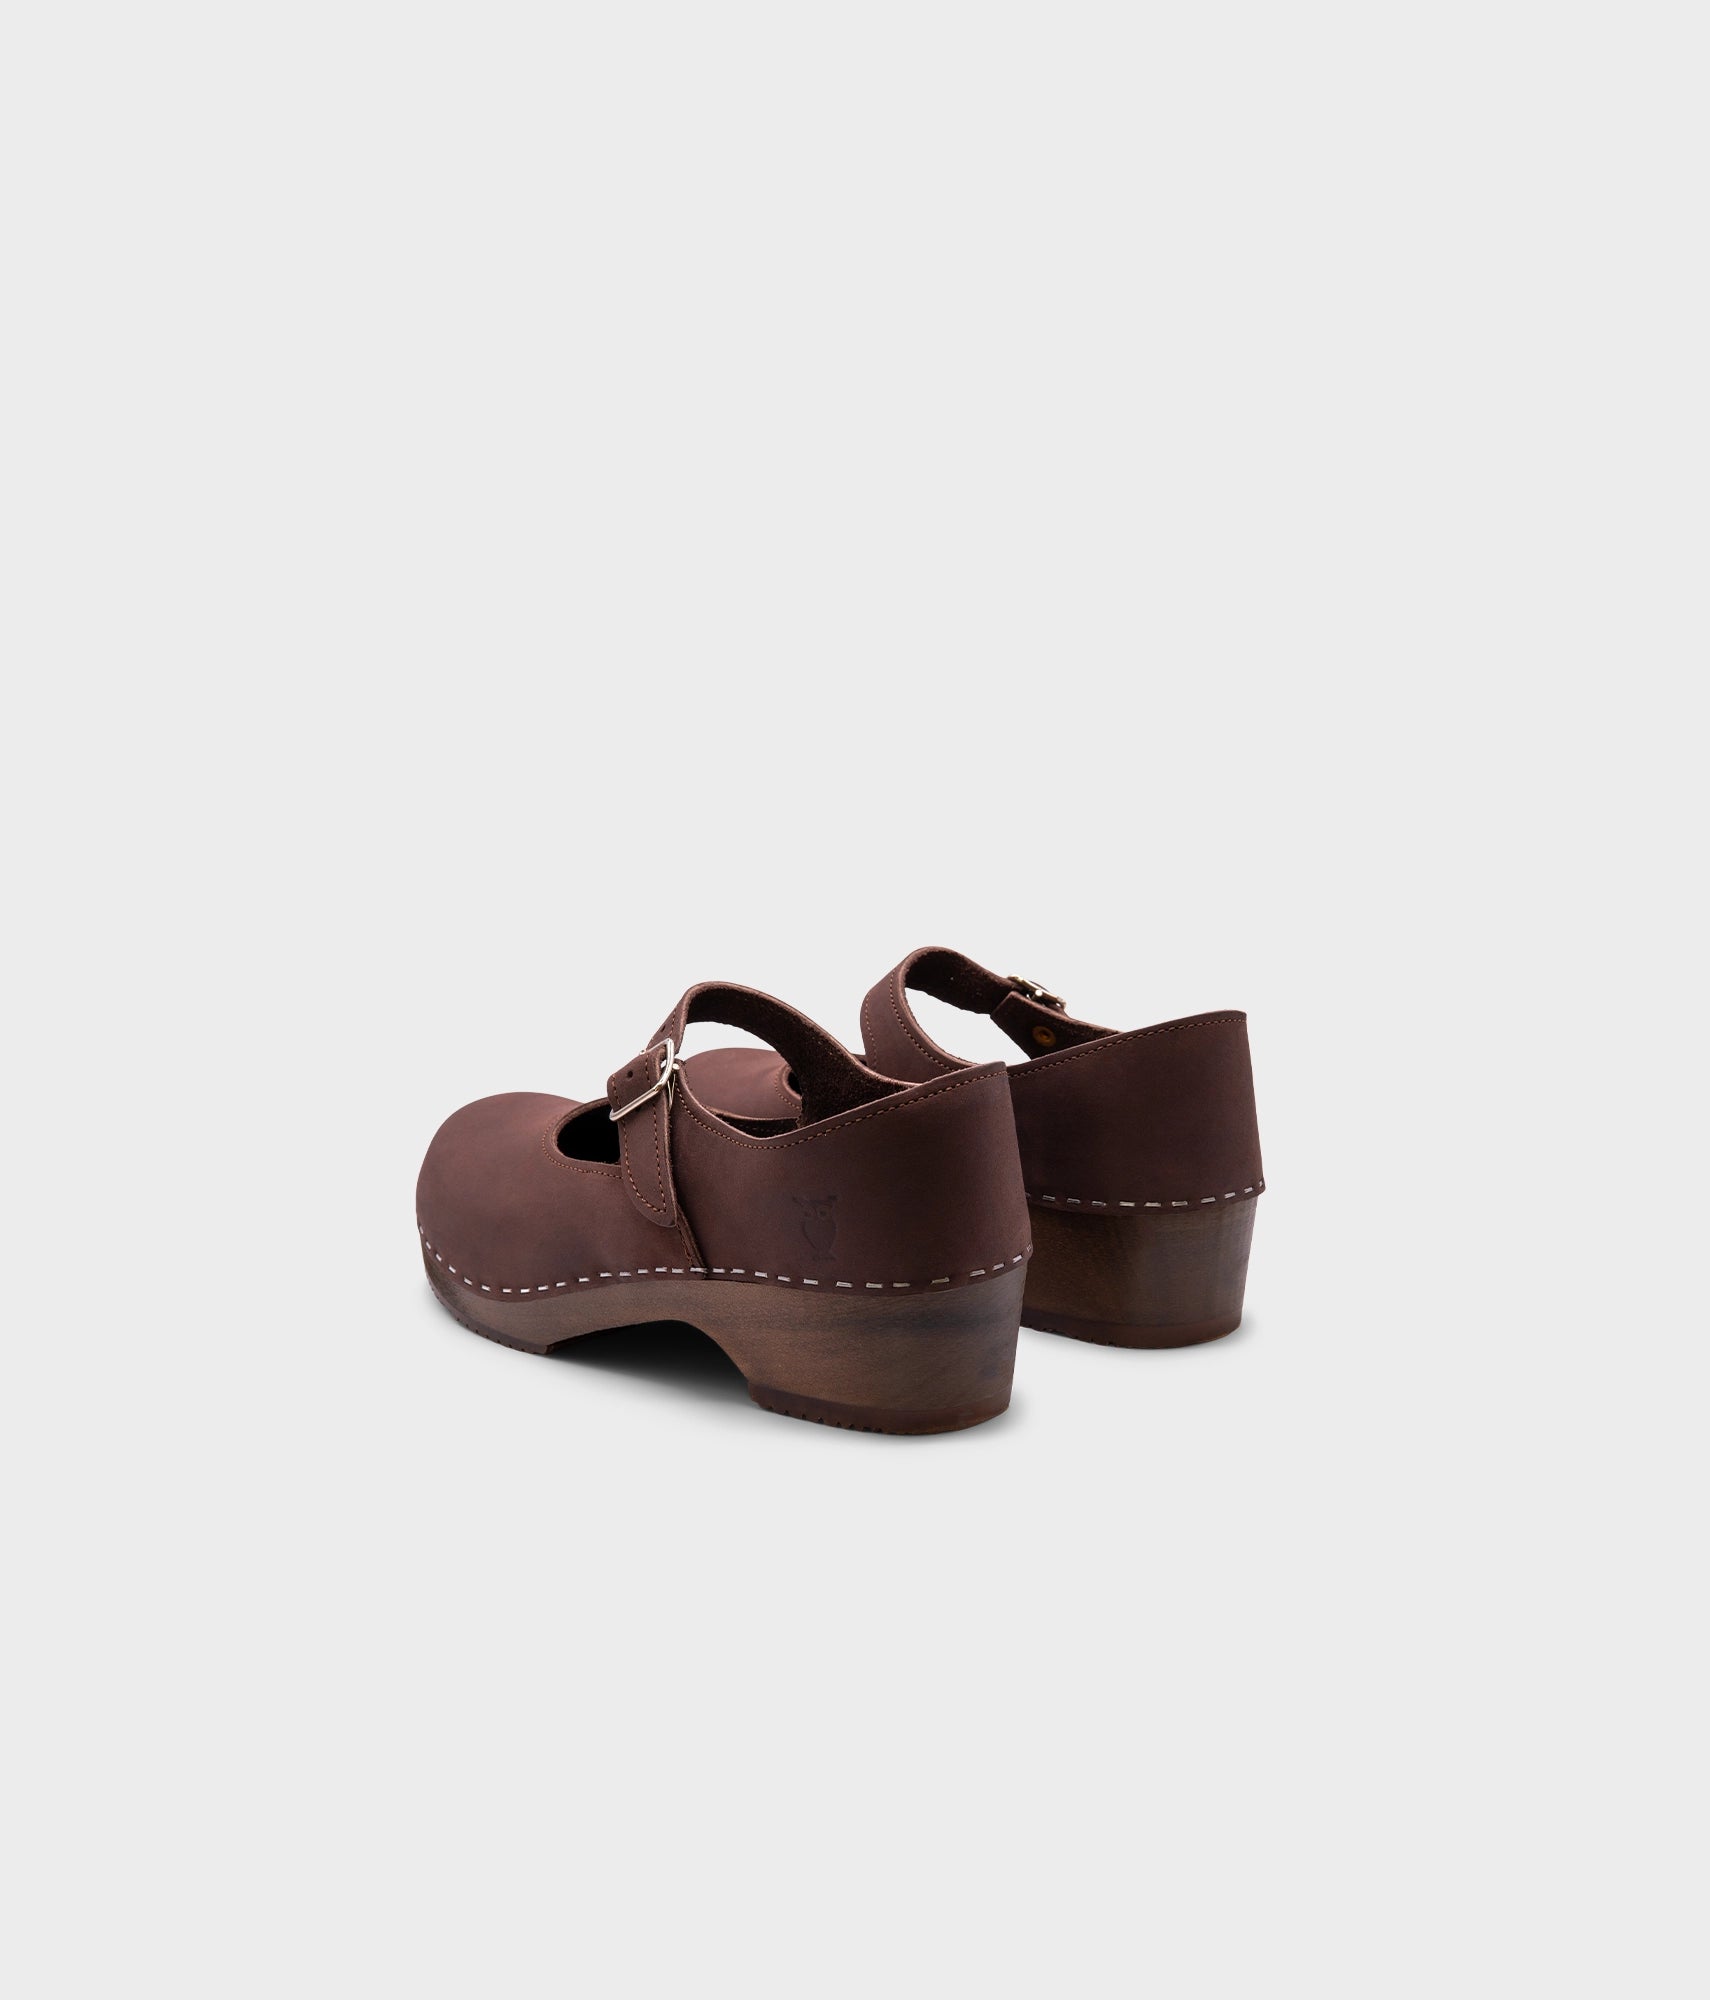 Mary Jane wooden clogs in dark brown nubuck leather stapled on a dark wooden base